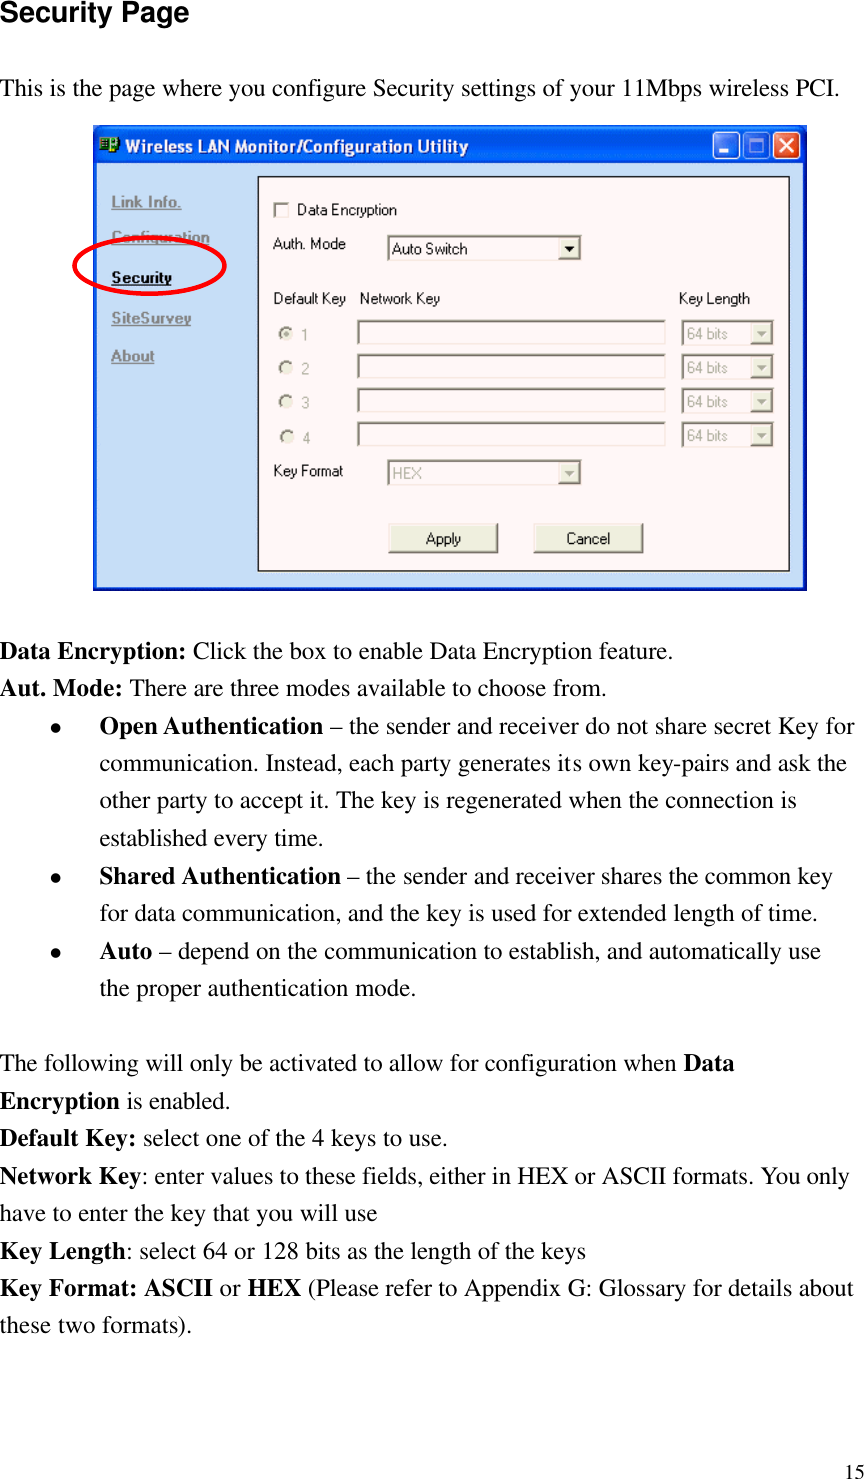  15Security Page This is the page where you configure Security settings of your 11Mbps wireless PCI.               Data Encryption: Click the box to enable Data Encryption feature. Aut. Mode: There are three modes available to choose from. l Open Authentication – the sender and receiver do not share secret Key for communication. Instead, each party generates its own key-pairs and ask the other party to accept it. The key is regenerated when the connection is established every time. l Shared Authentication – the sender and receiver shares the common key for data communication, and the key is used for extended length of time. l Auto – depend on the communication to establish, and automatically use the proper authentication mode.  The following will only be activated to allow for configuration when Data Encryption is enabled. Default Key: select one of the 4 keys to use. Network Key: enter values to these fields, either in HEX or ASCII formats. You only have to enter the key that you will use Key Length: select 64 or 128 bits as the length of the keys Key Format: ASCII or HEX (Please refer to Appendix G: Glossary for details about these two formats). 